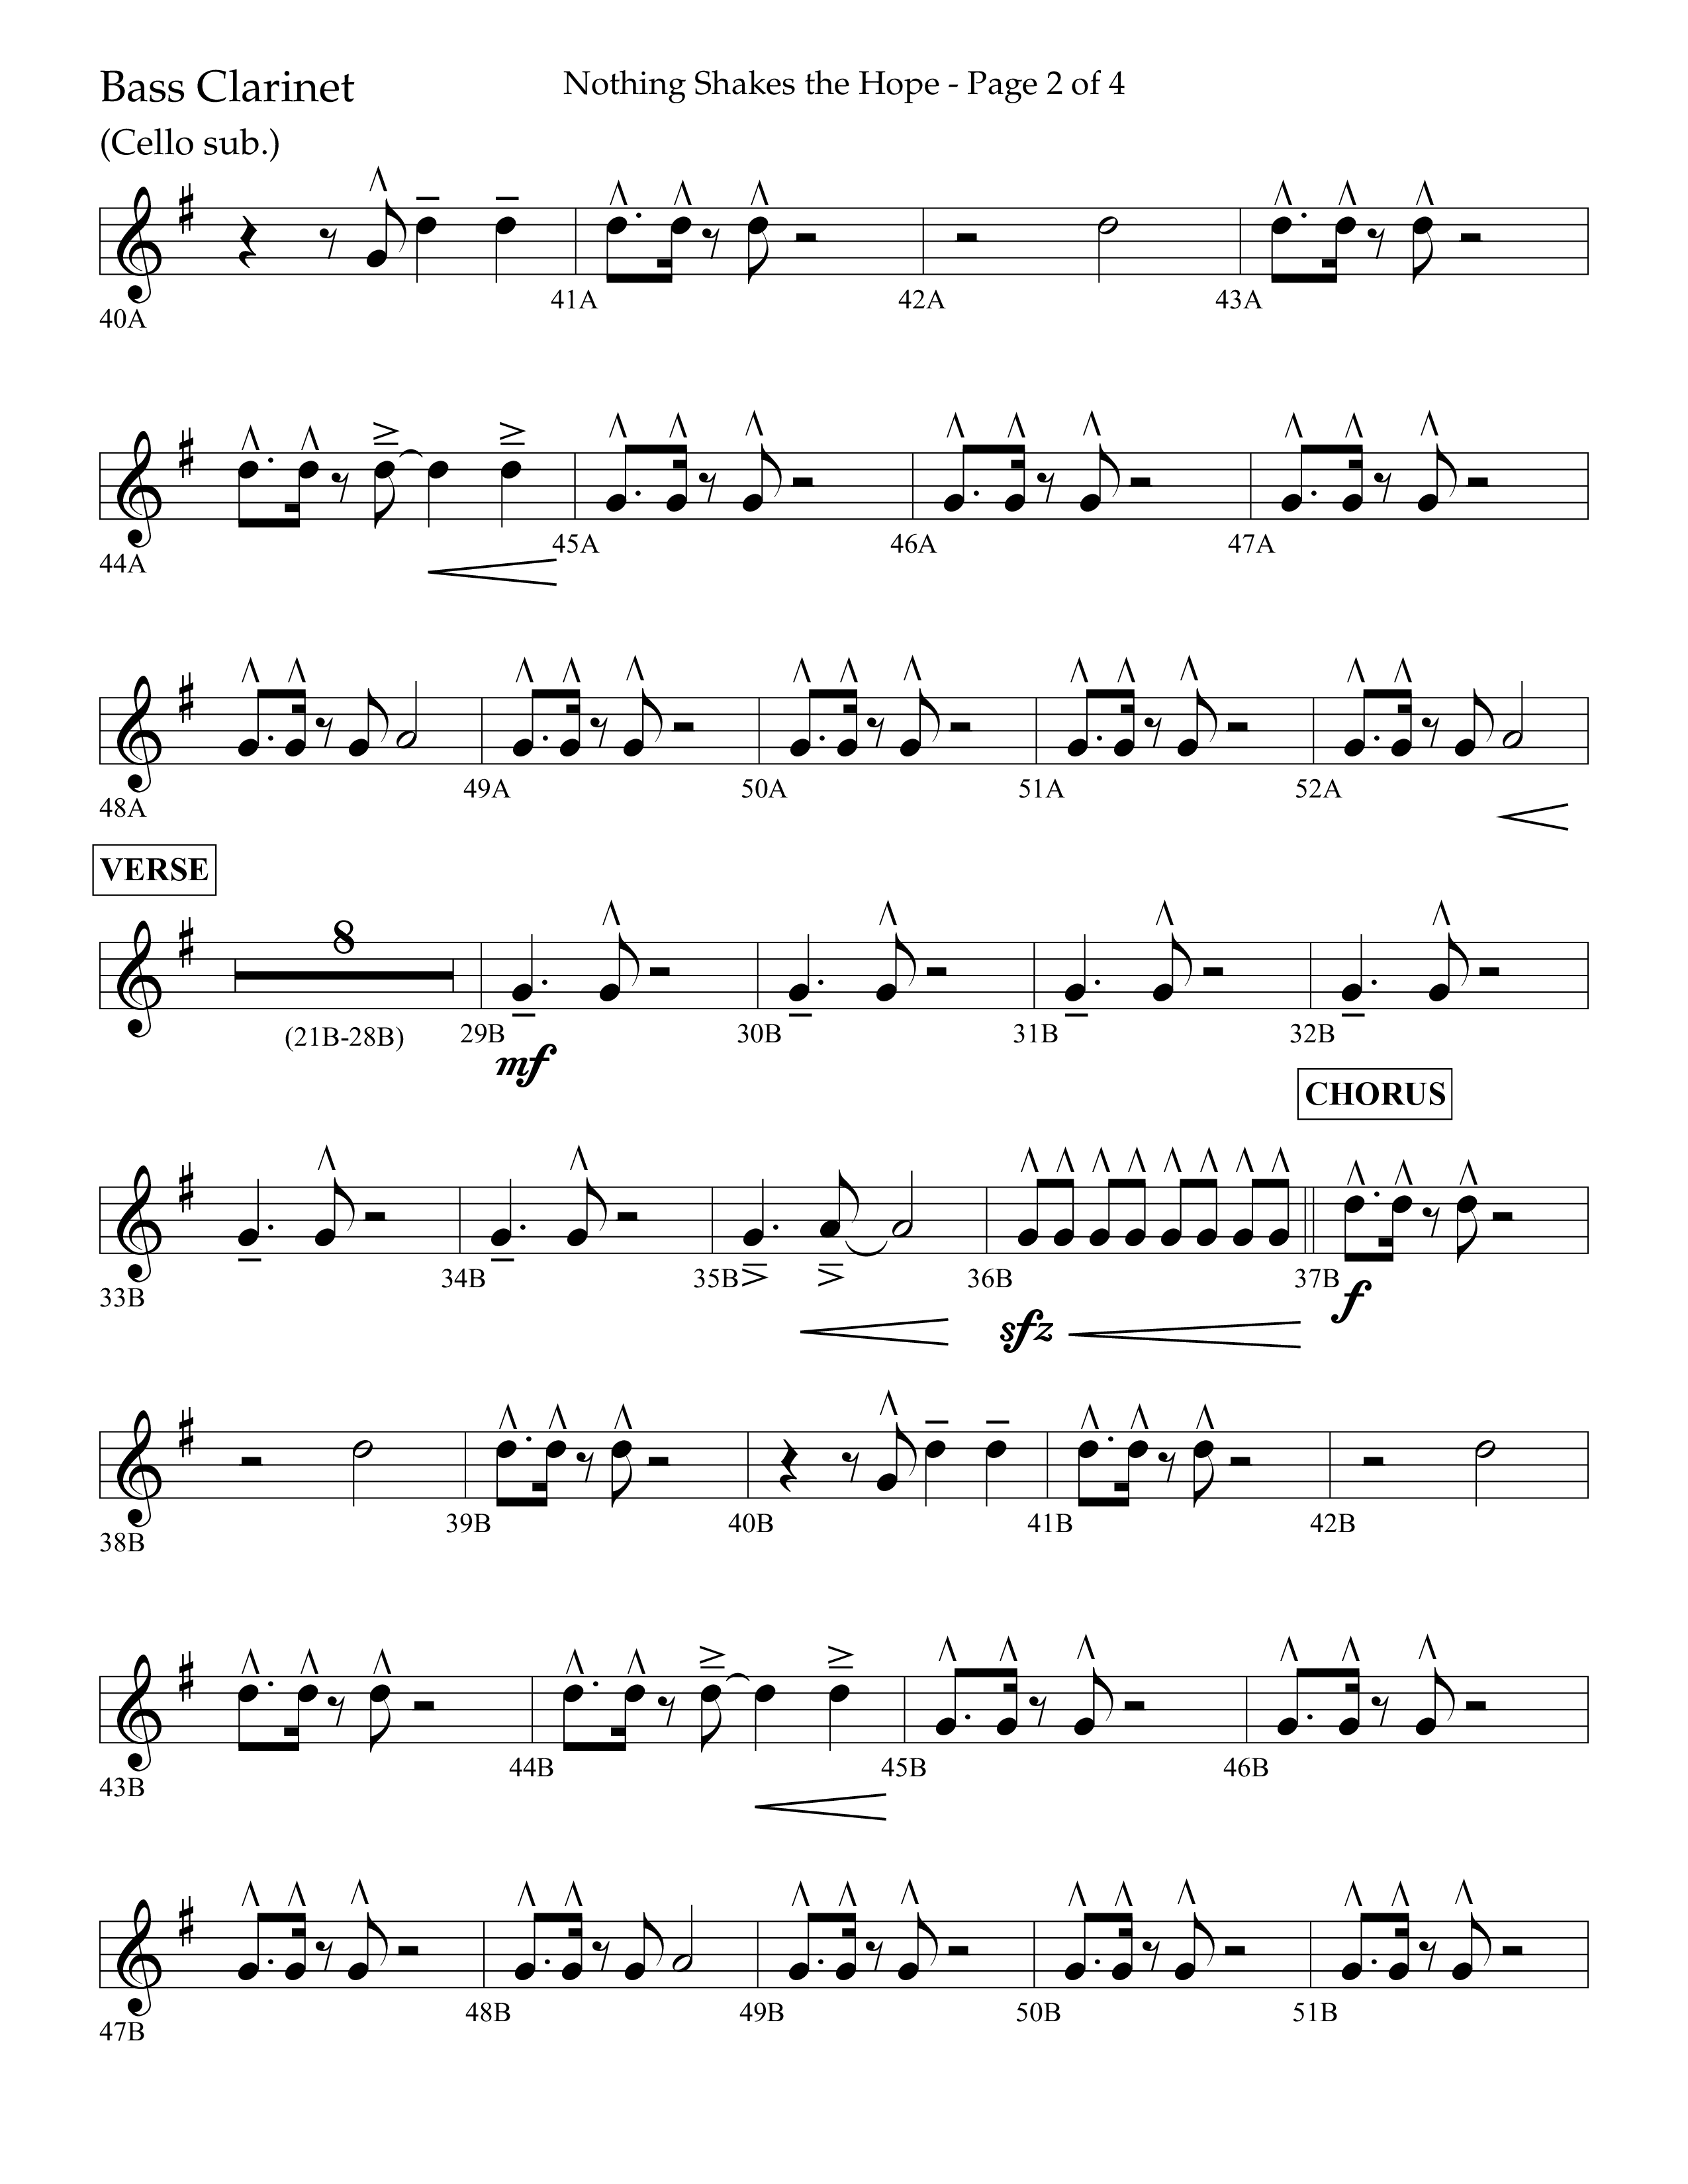 Nothing Shakes The Hope (Choral Anthem SATB) Bass Clarinet (Lifeway Choral / Arr. John Bolin / Arr. Don Koch / Orch. Cliff Duren)